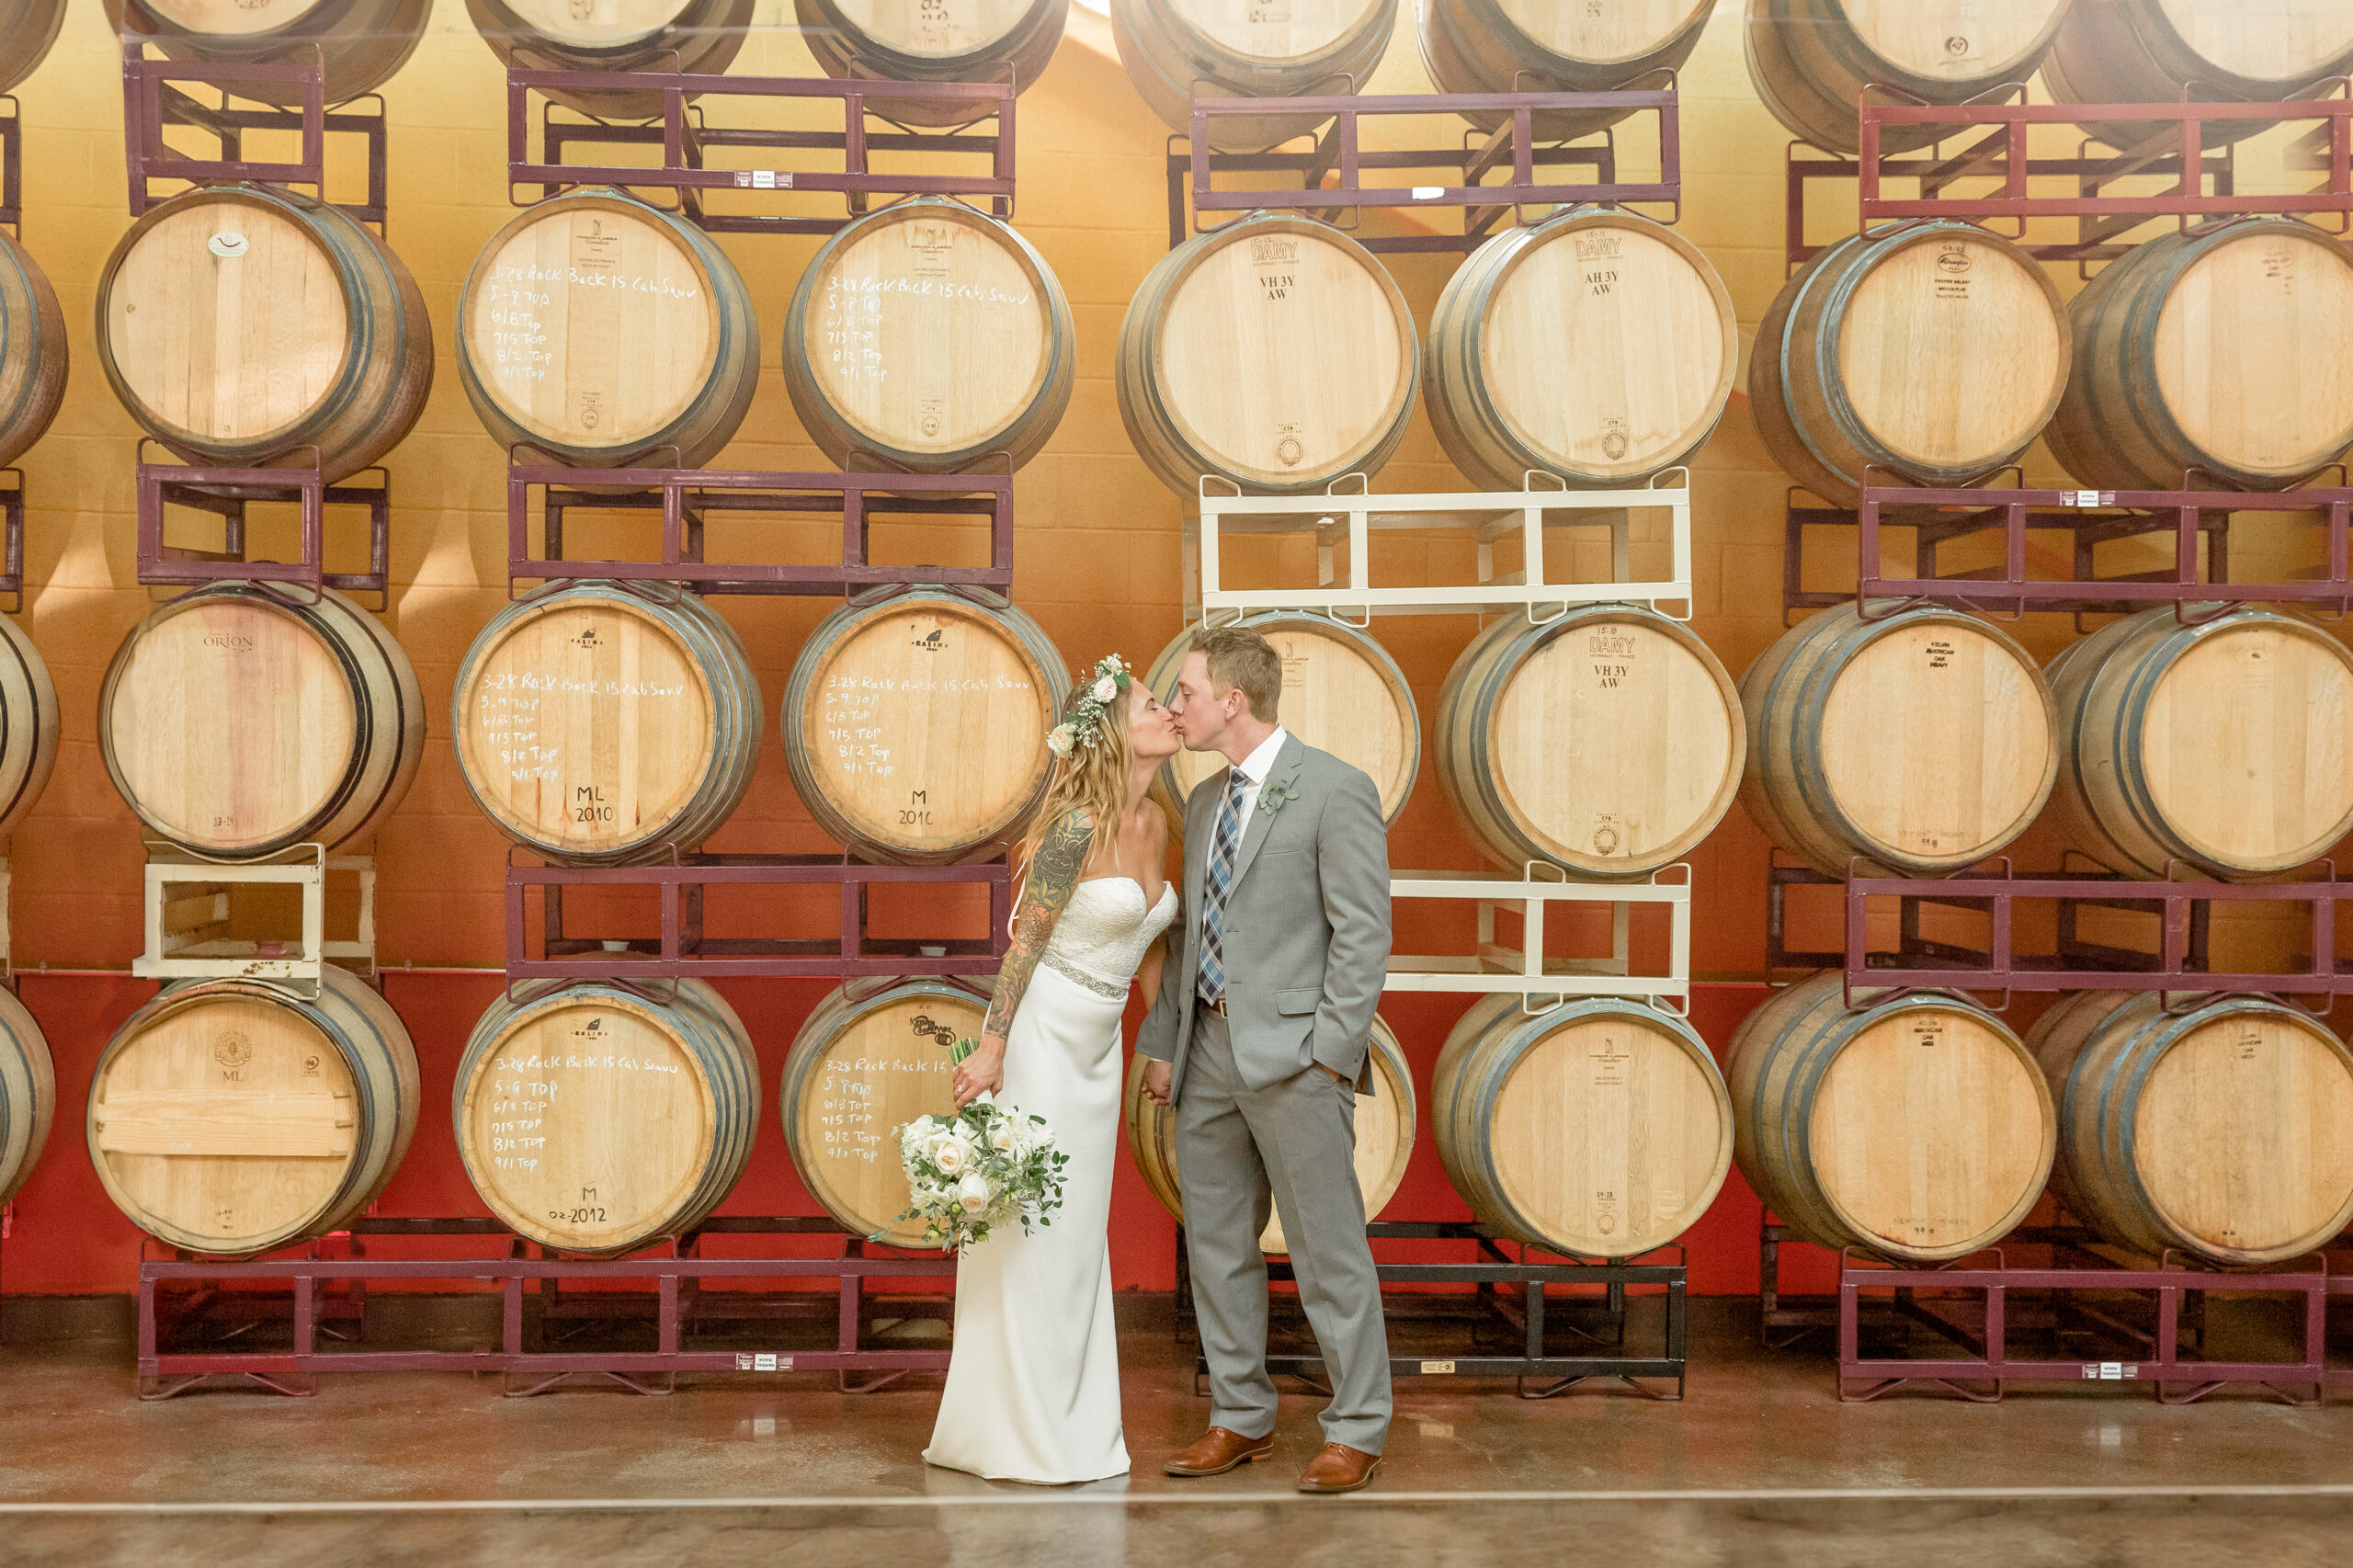 Newport Vineyards offers a unique and unforgettable atmosphere for couples tying the knot in Newport.